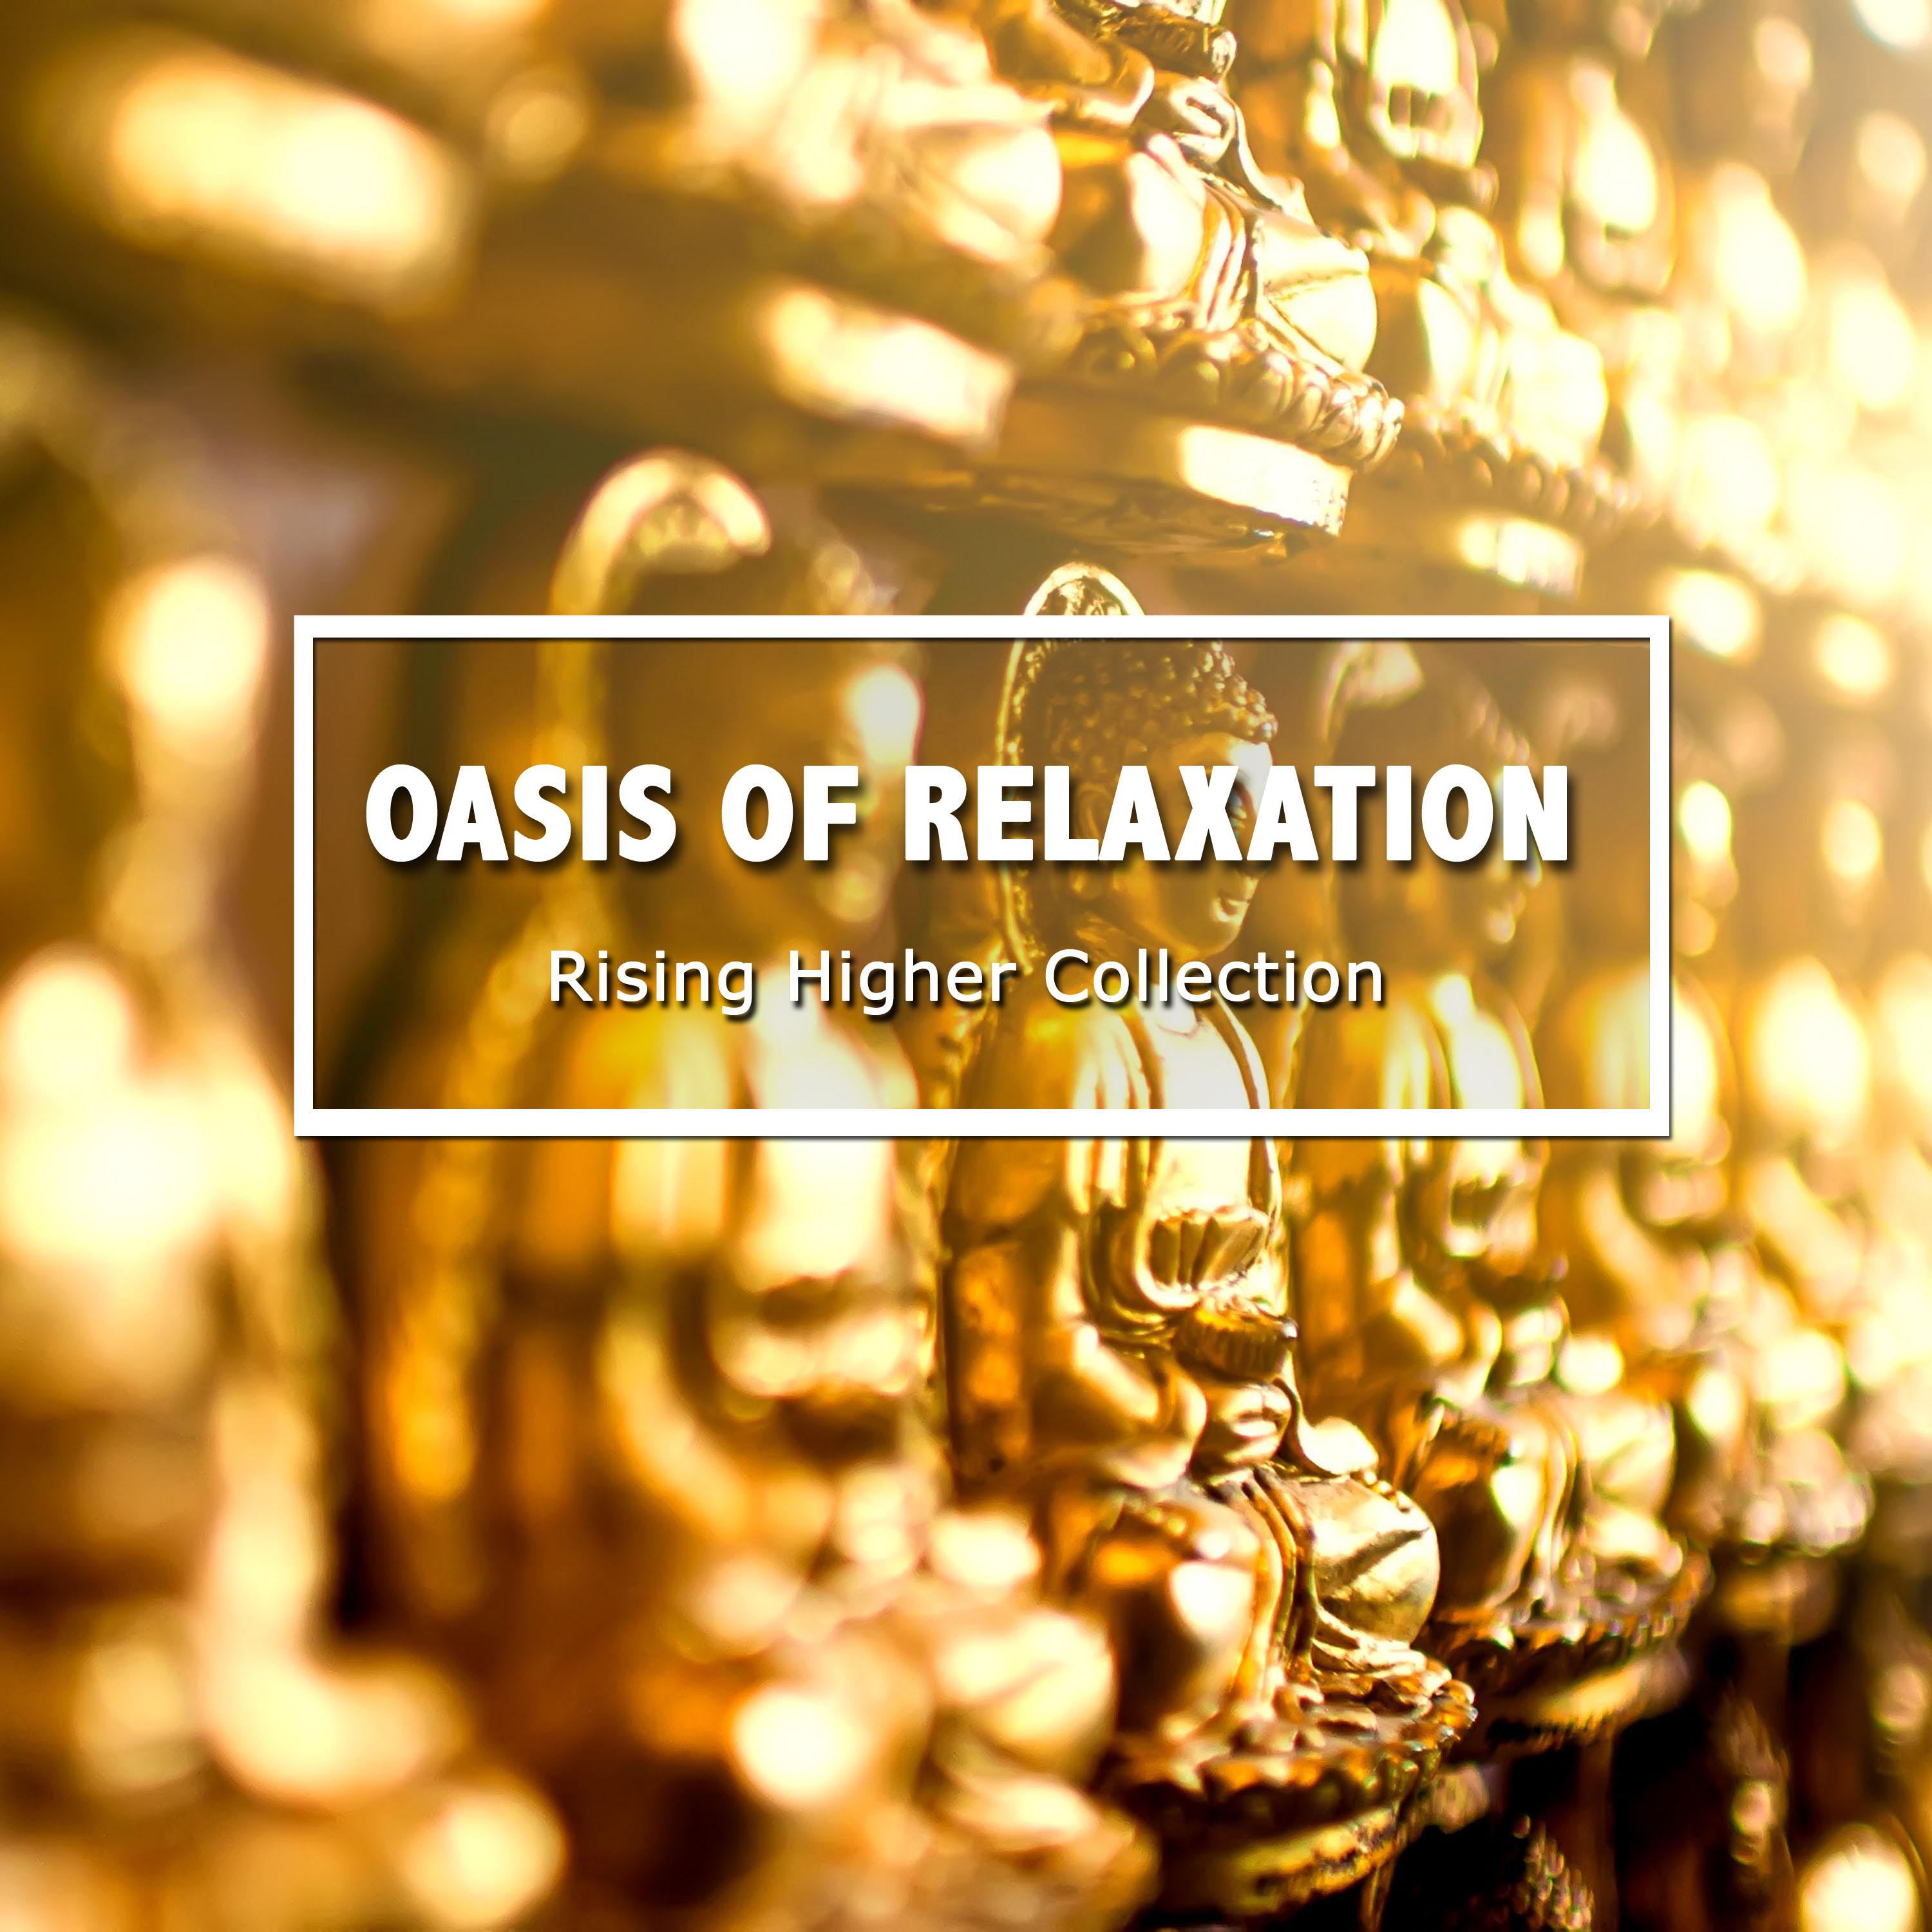 20 Oasis of Relaxation: Rising Higher Collection